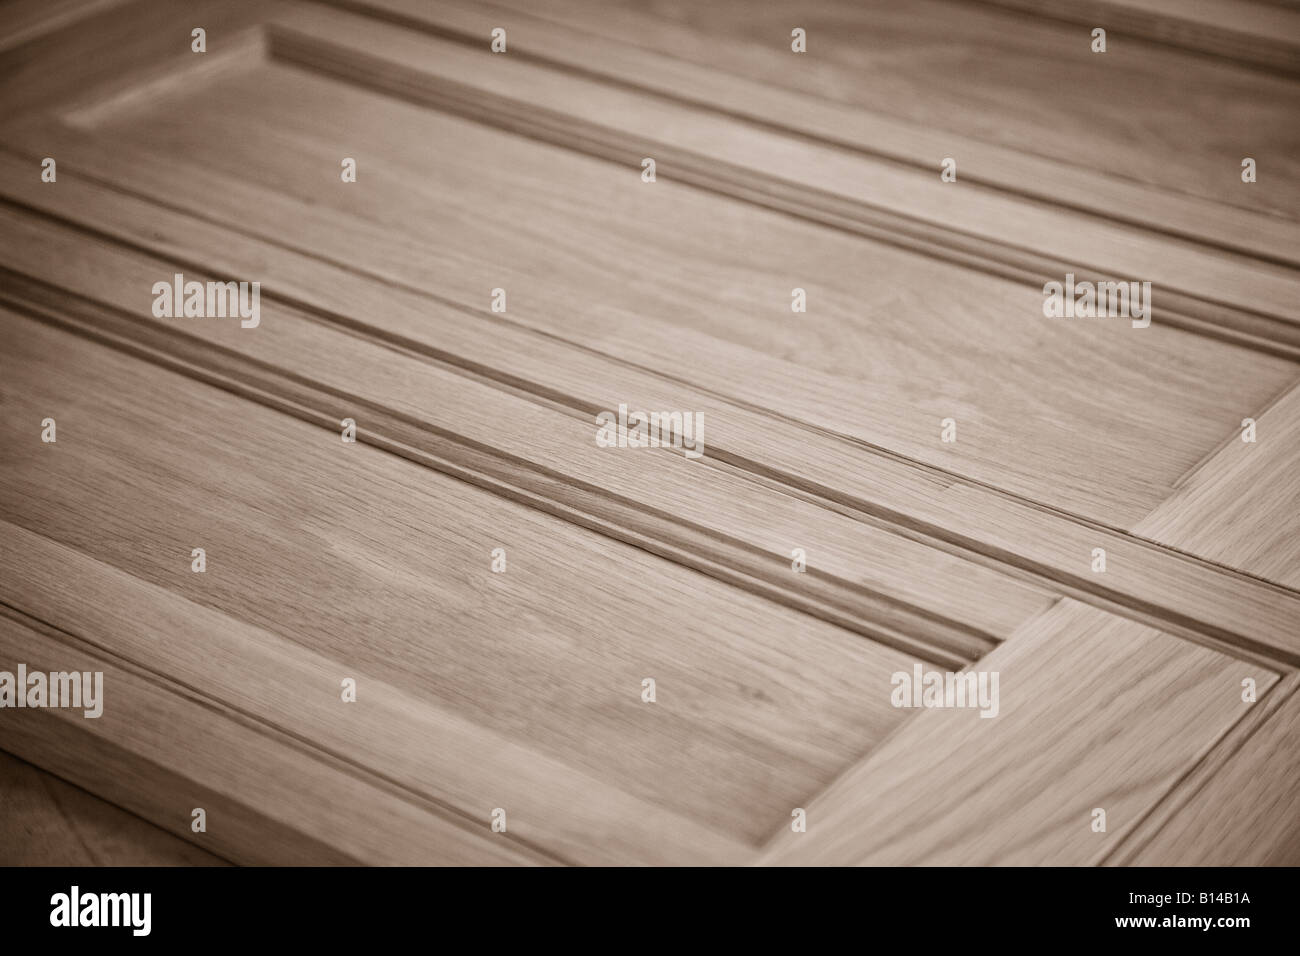 Close up of quality wooden panelling Stock Photo